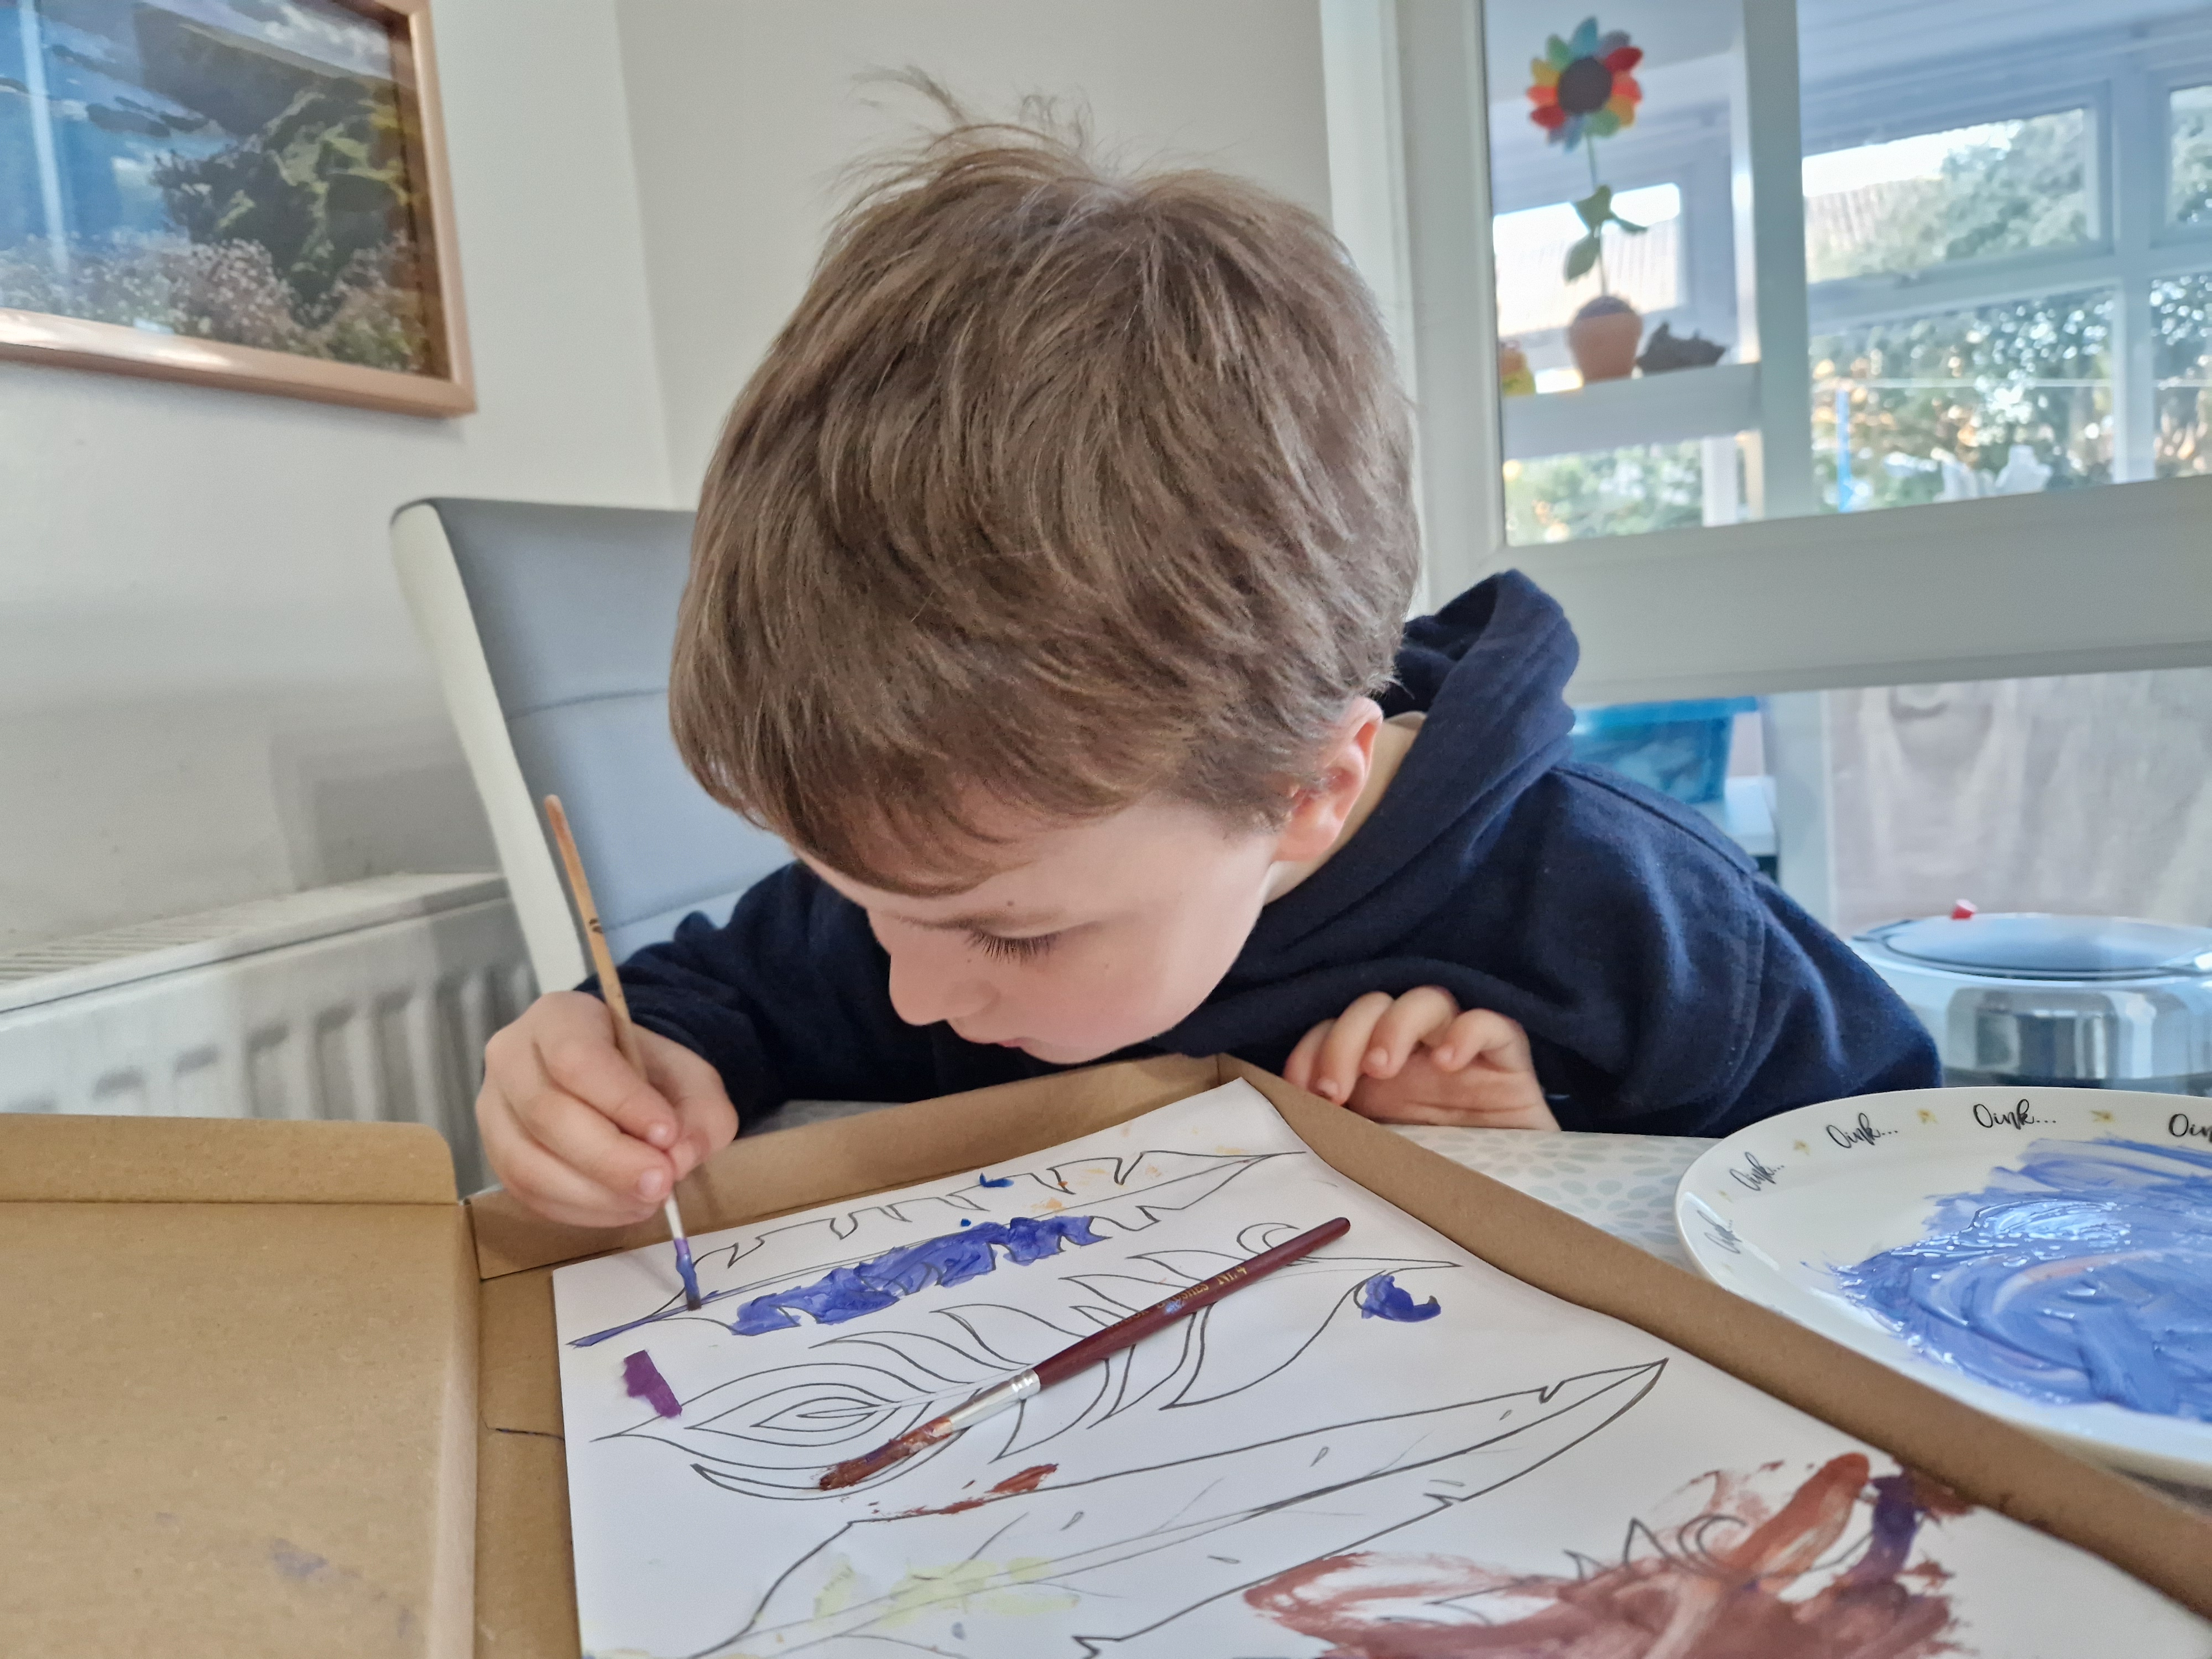 Painting activity from his art box